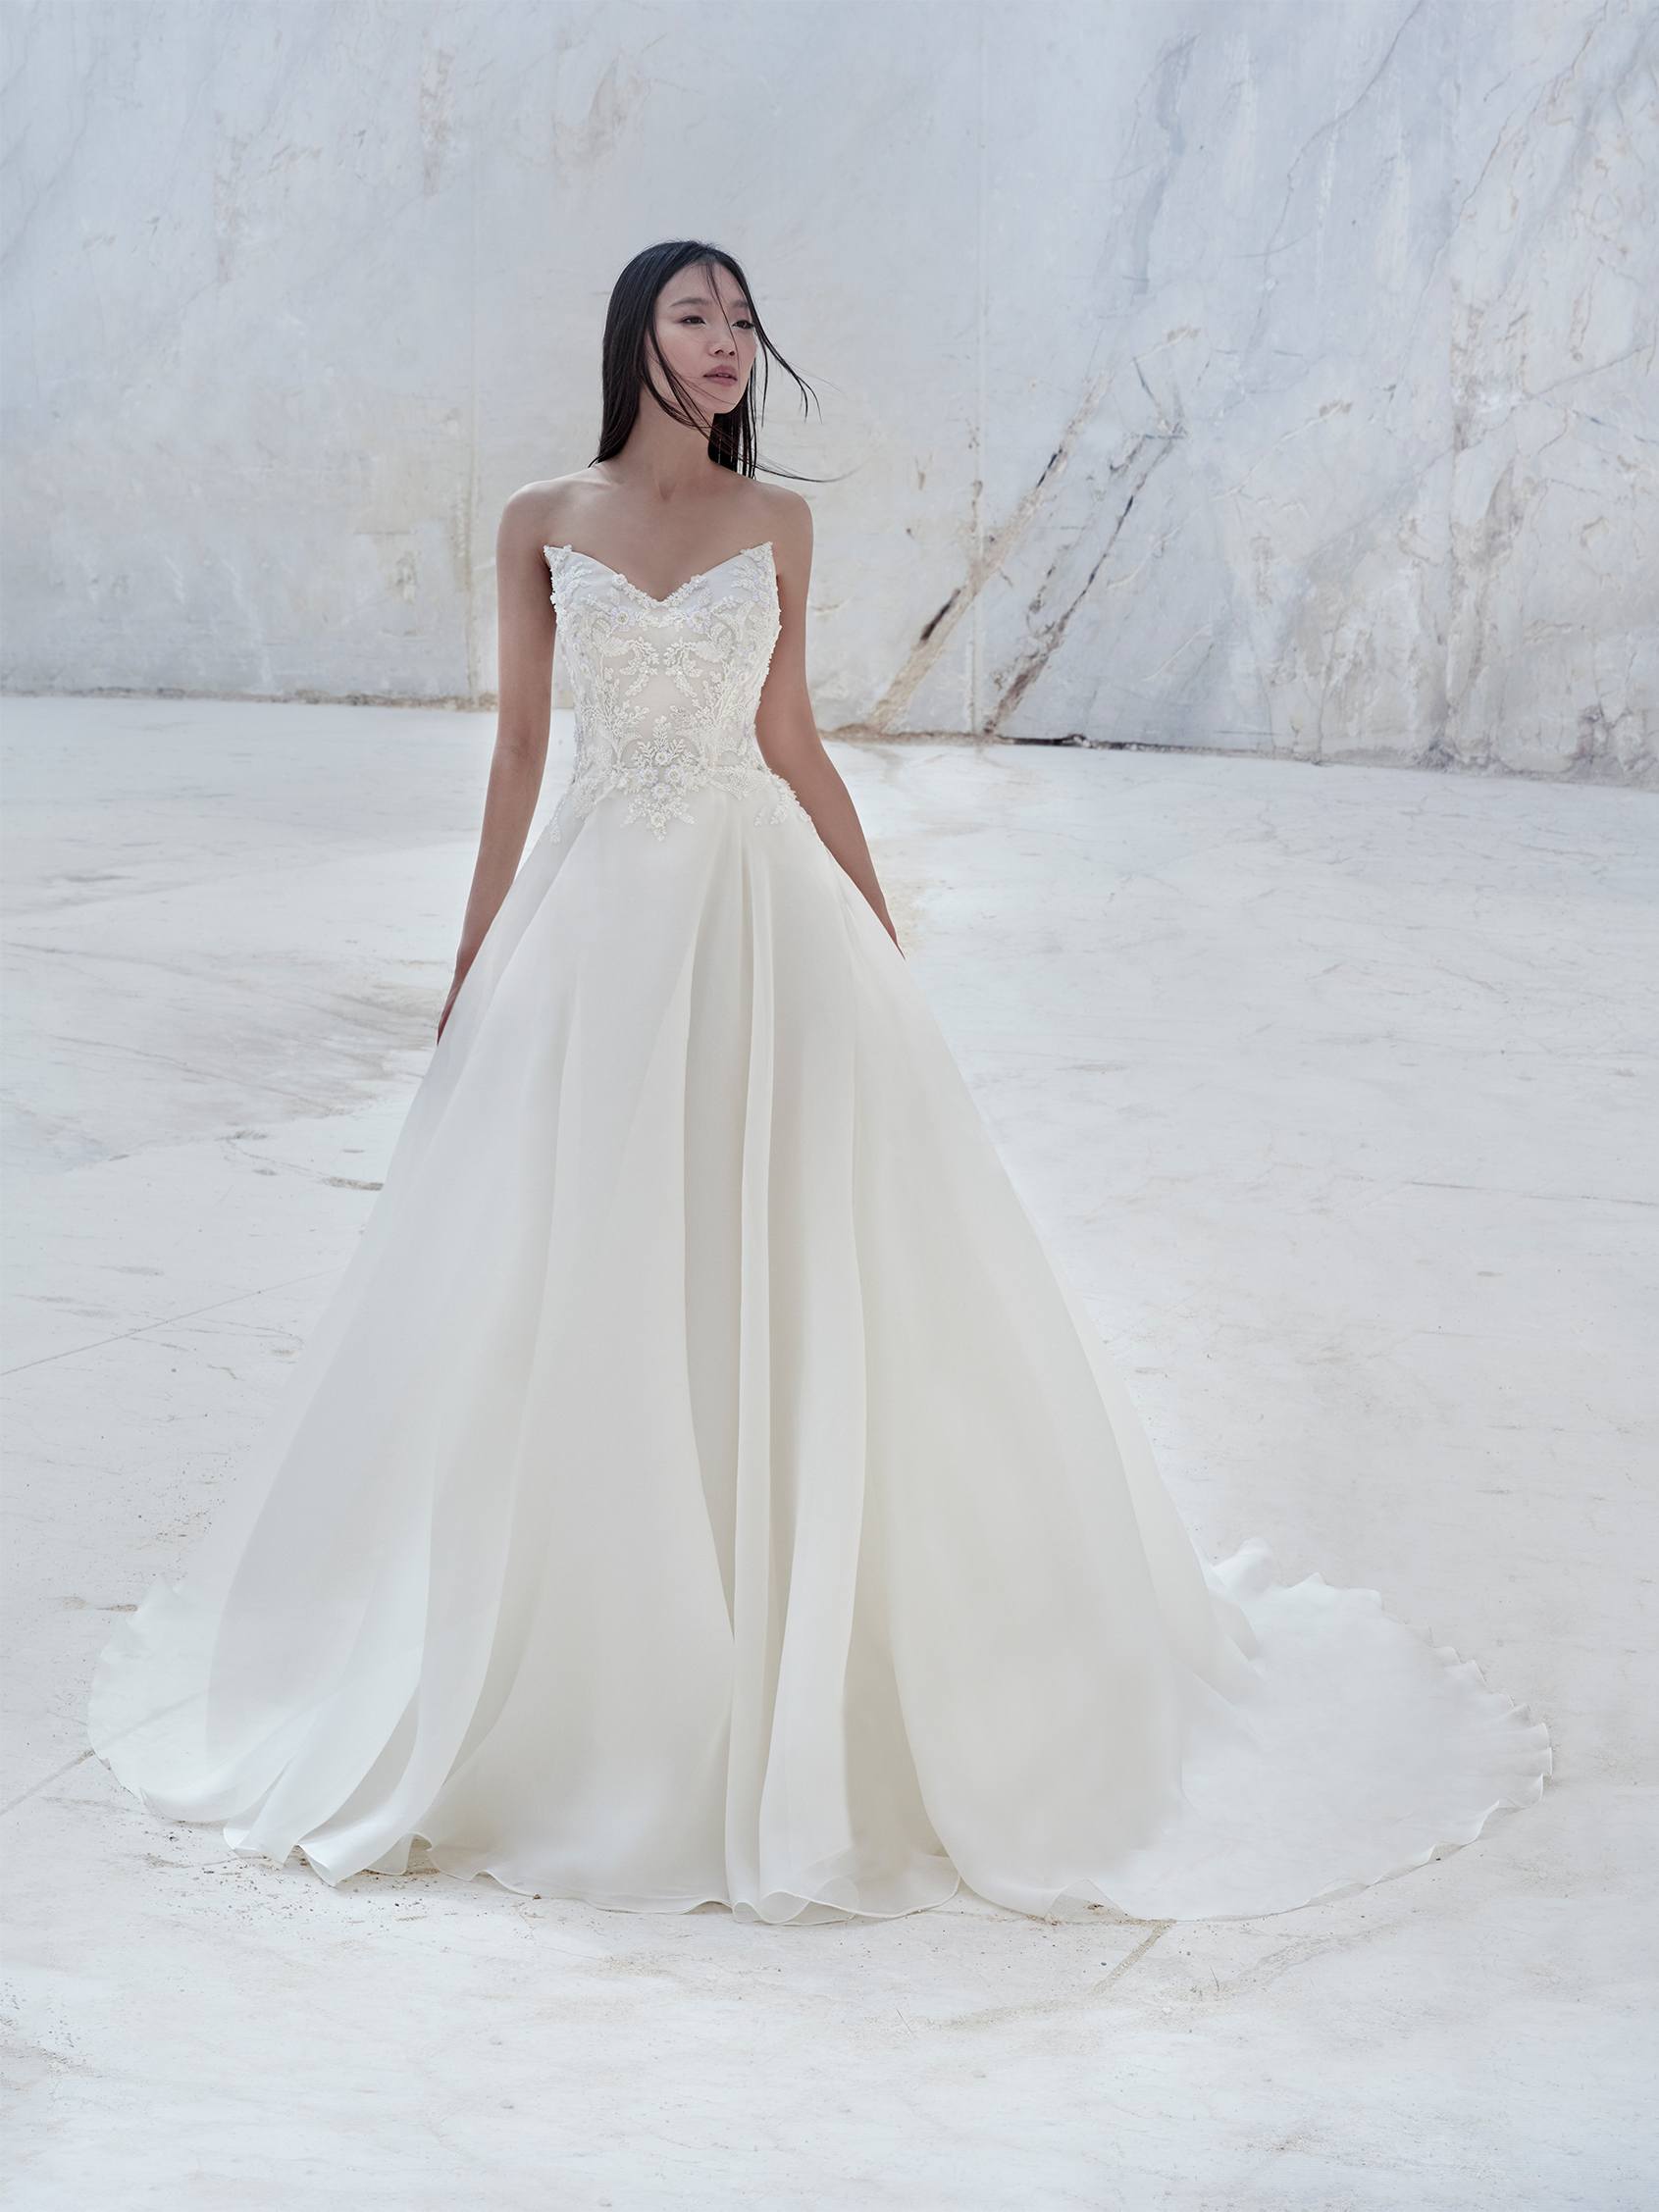 A Backless Pronovias Dress for an Autumn Wedding with a Persian